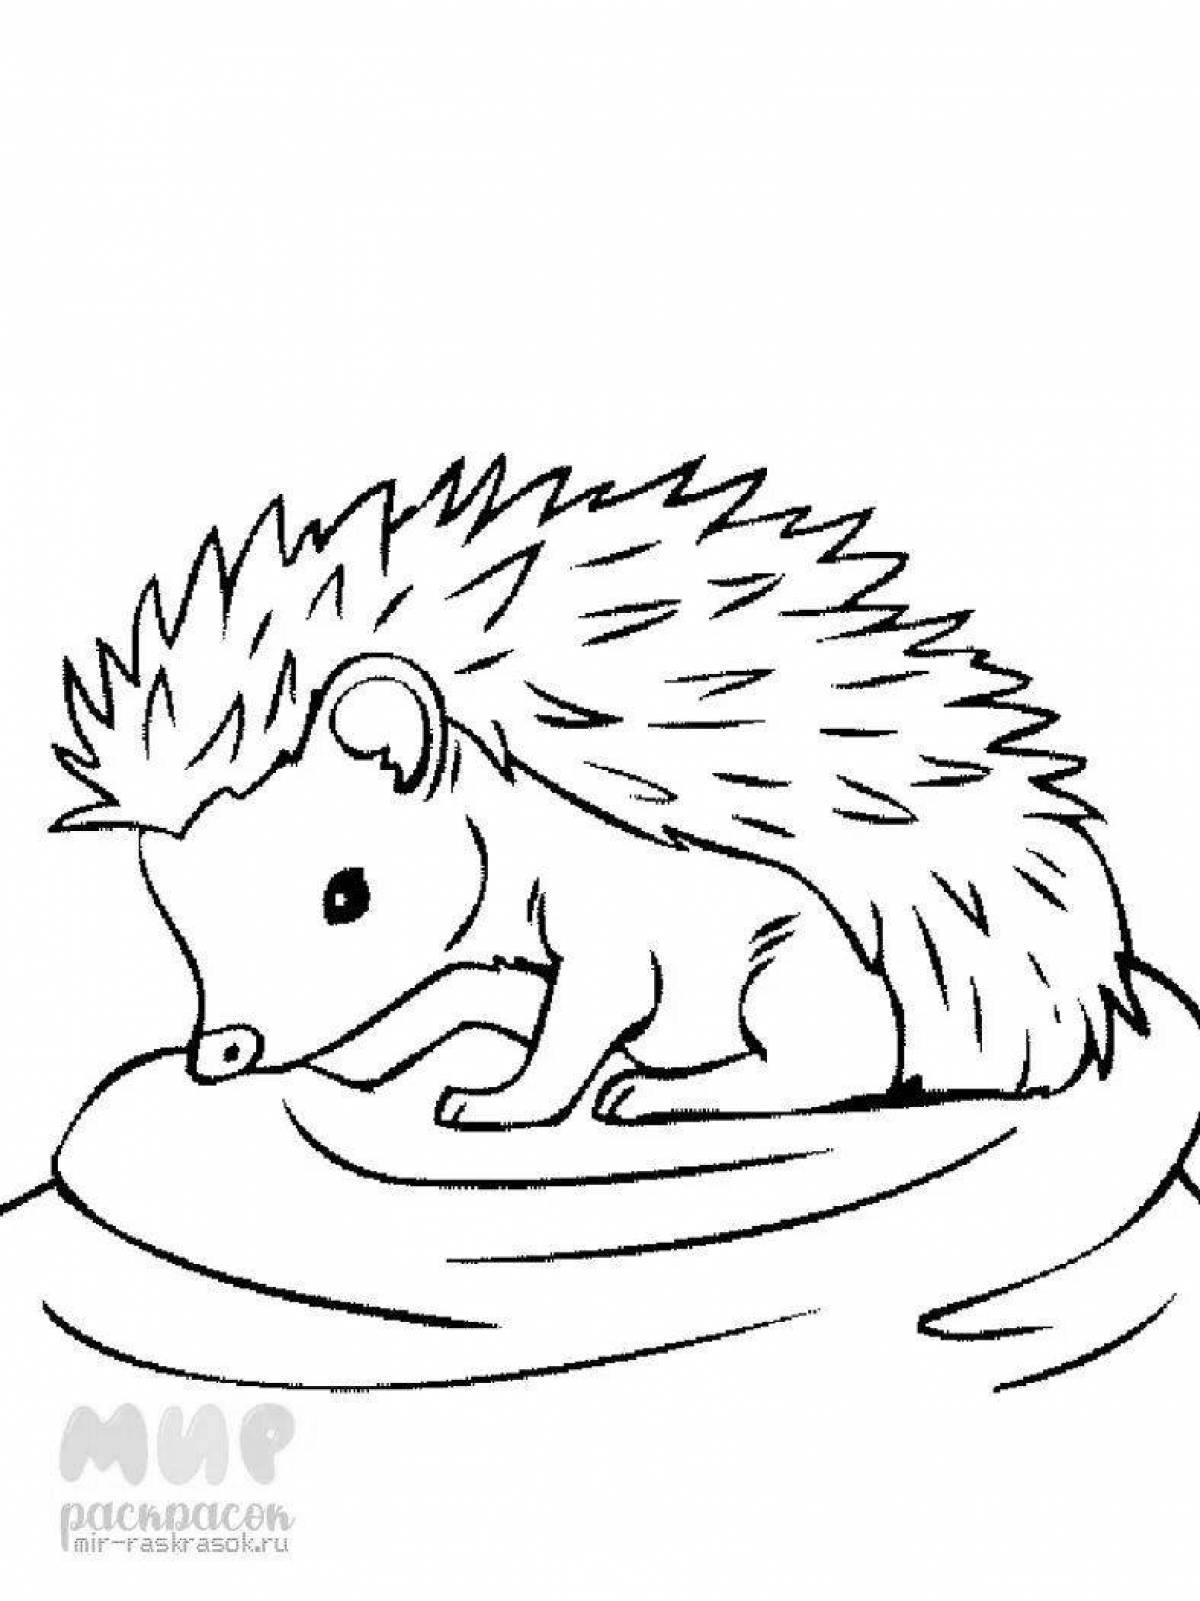 Drawing of an adorable hedgehog for children